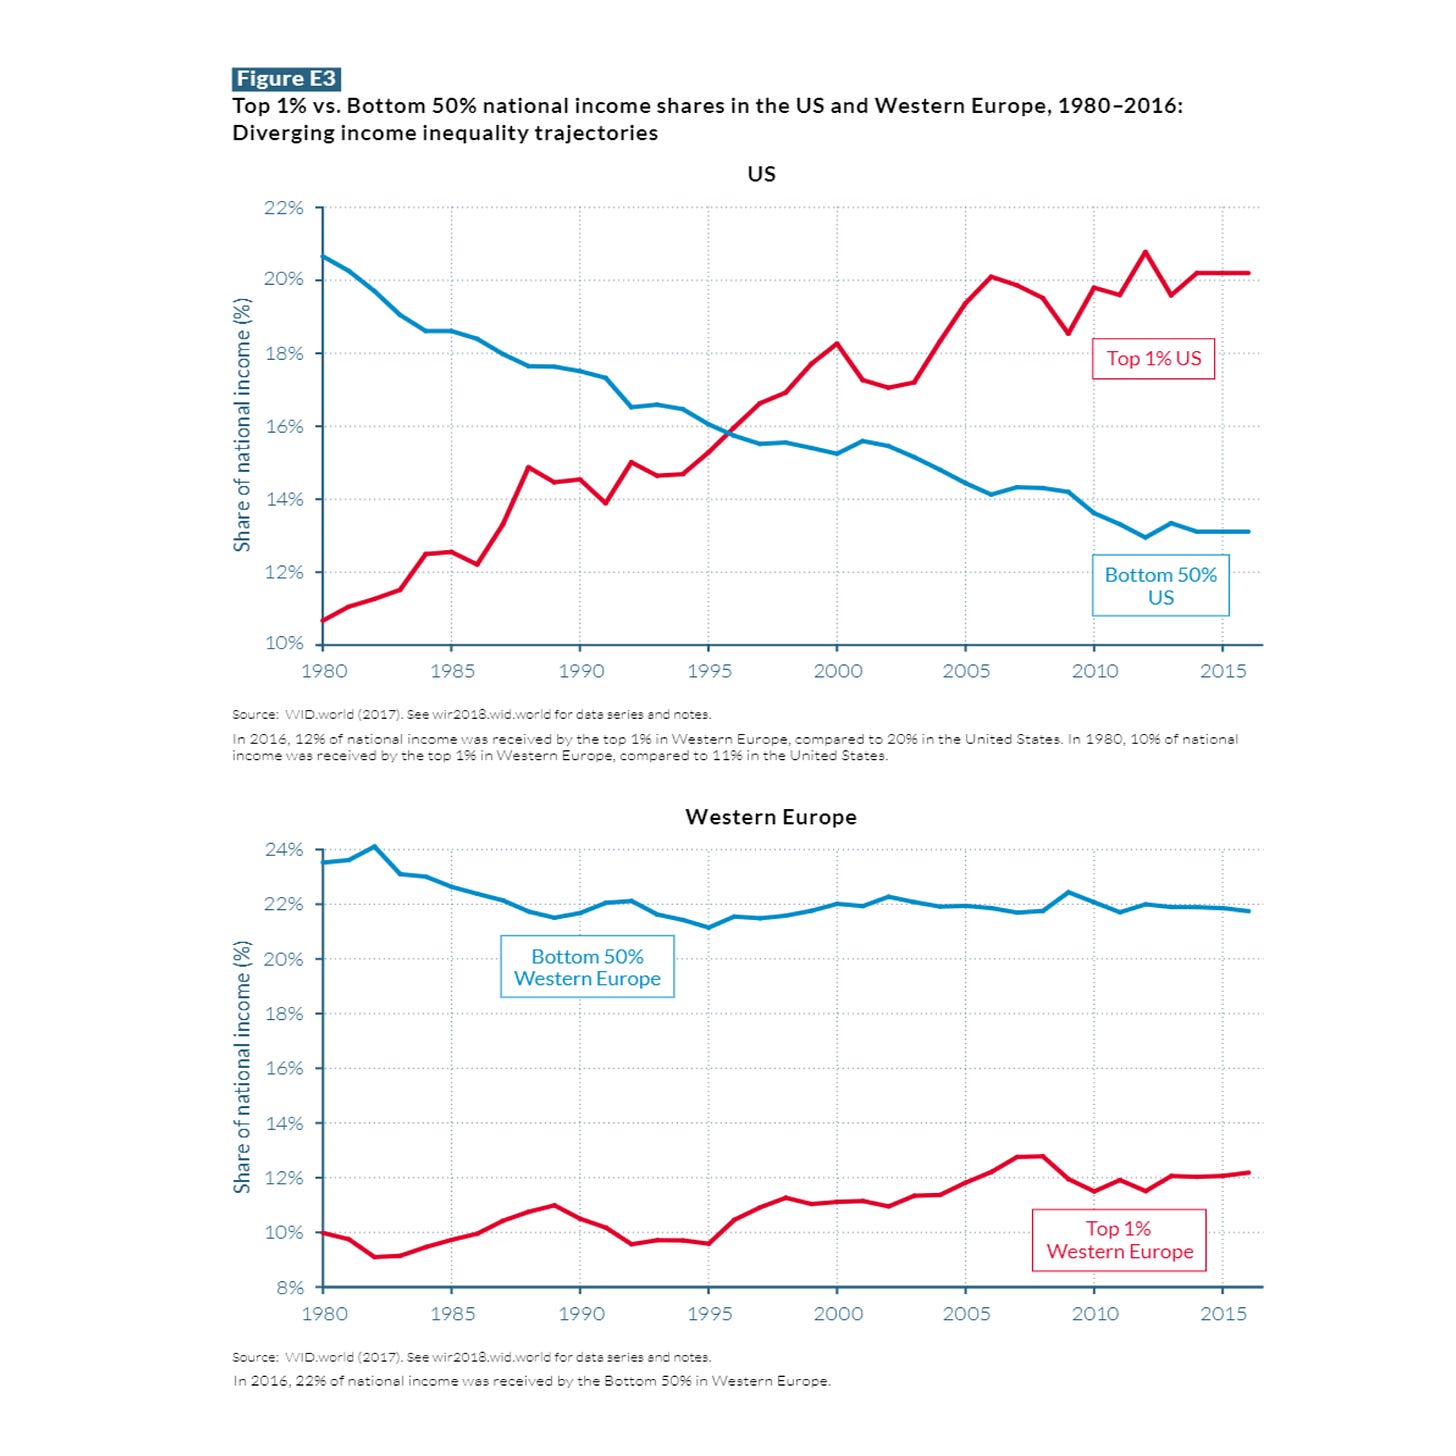 May be an image of text that says 'Figure Top Bottom national income shares Diverging income inequality trajectories 22% the US and Western Europe, 1980-2016: US 20% 18% 14% Top1U 12% 1980 1985 Source: 1990 1995 Bottom 50% US 2000 Û 2005 2010 24% 2015 UnitedStates. 22% Western Europe 20% Bottom 50% 18% 14% 12% 10% 8% 1980 1985 Source: WID.worl(2017) 1990 1995 Top Western urope 2000 dw 2005 2010 2015'